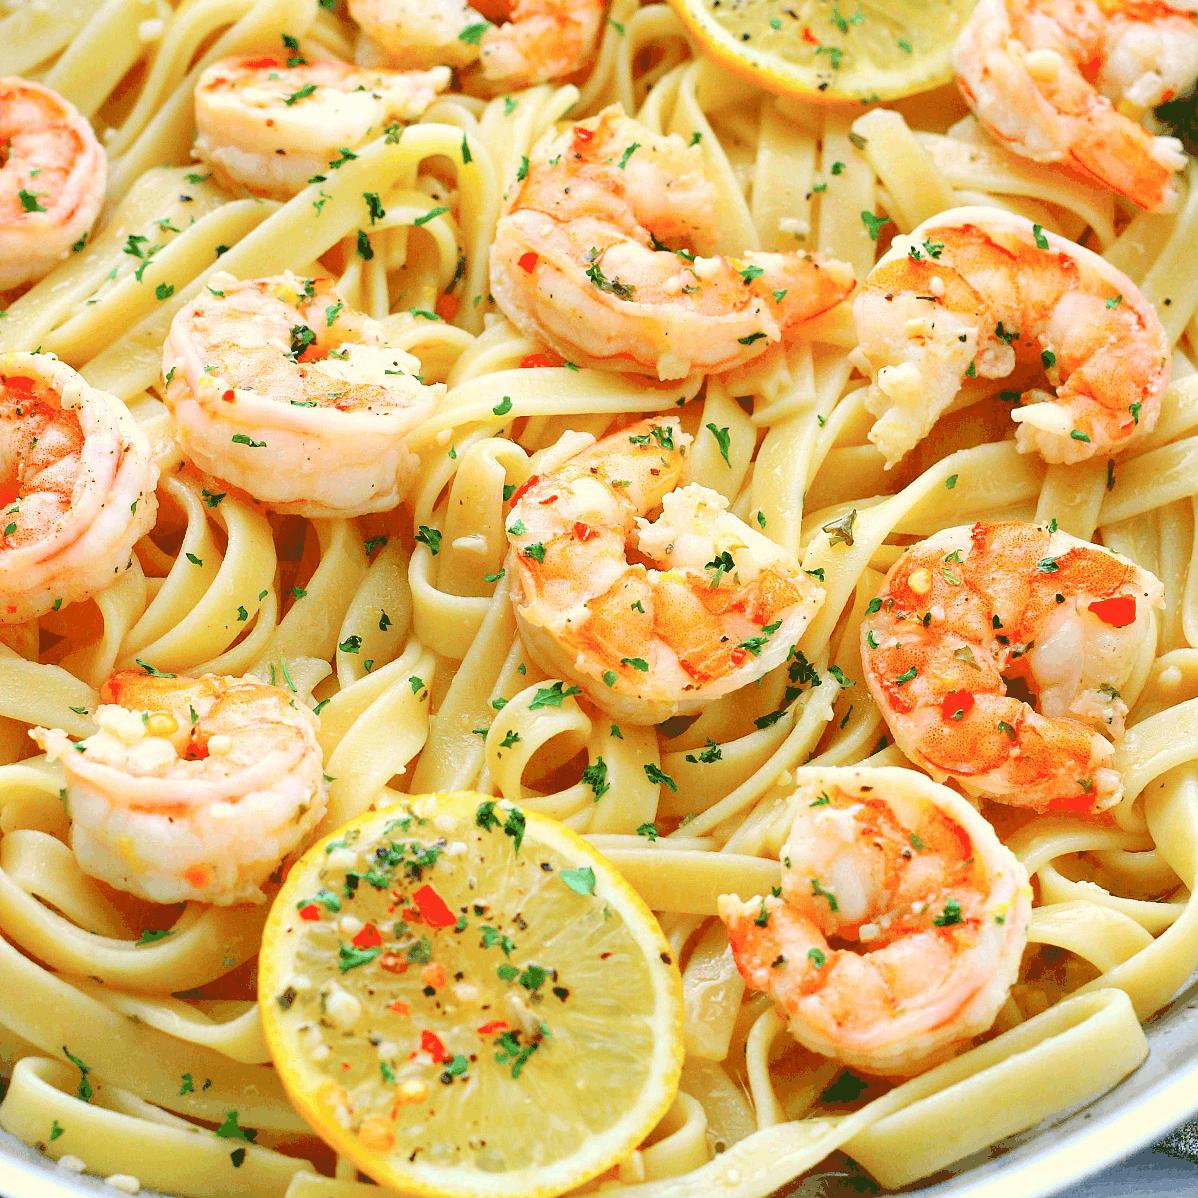  Impress your guests with this easy yet elegant shrimp recipe